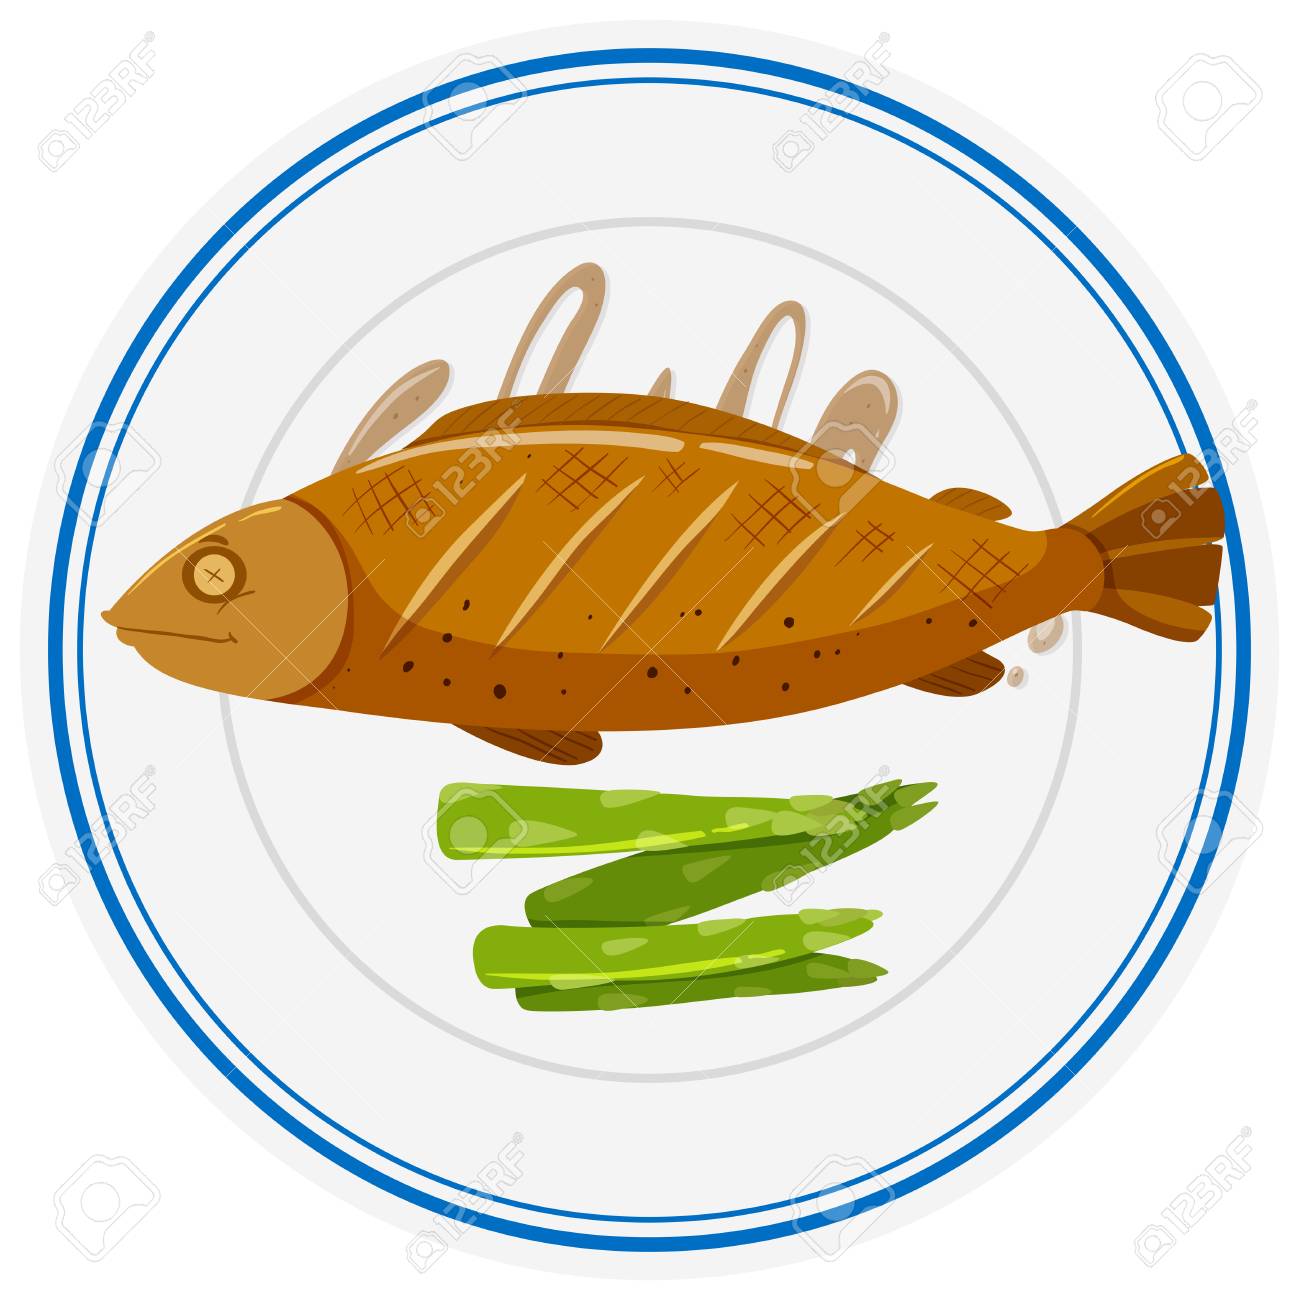 Grilled fish and asparagus on plate illustration.